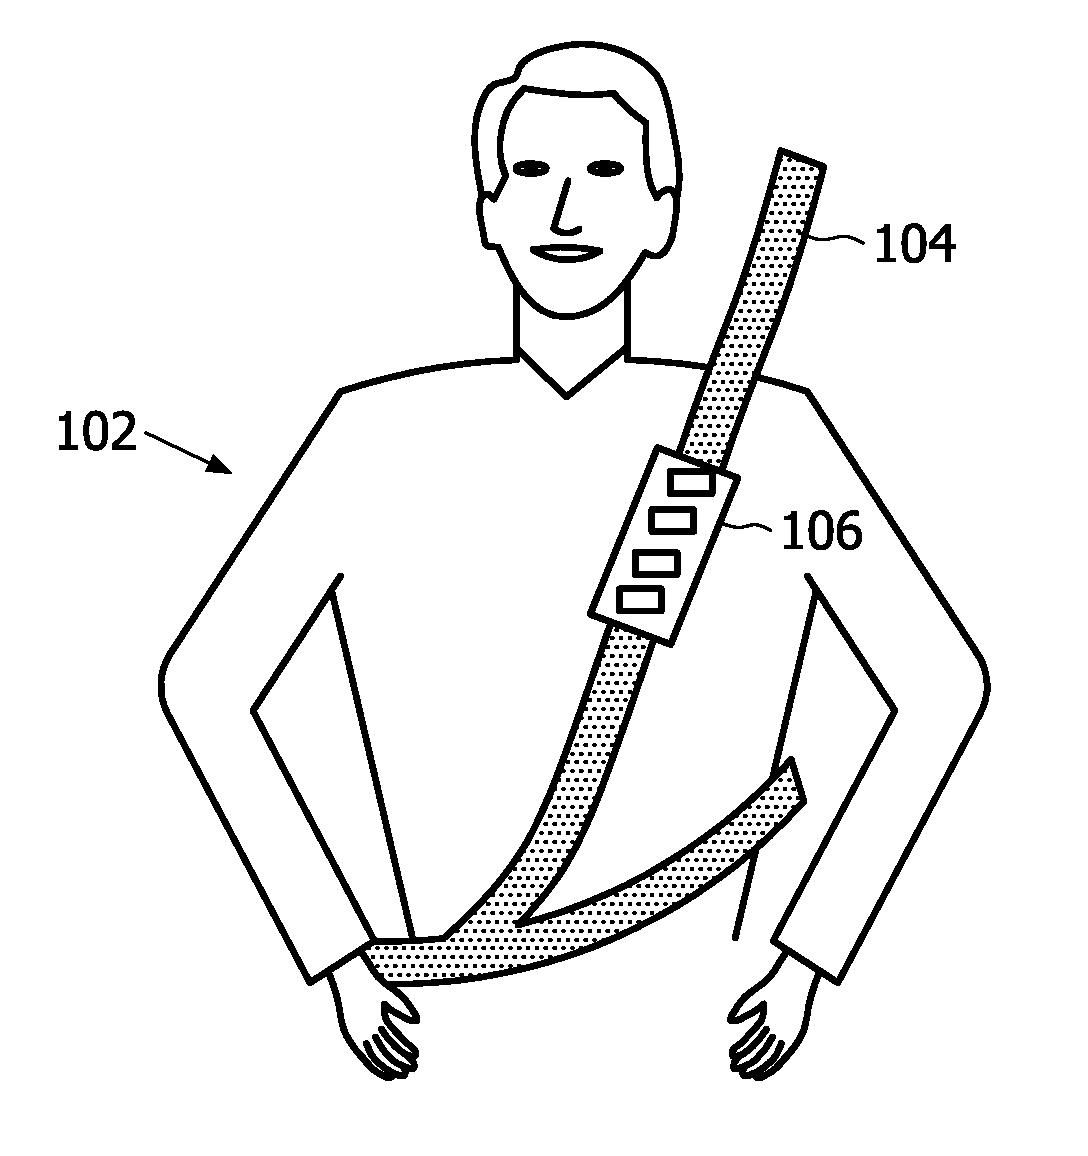 Method and system for monitoring vital body signs of a seated person